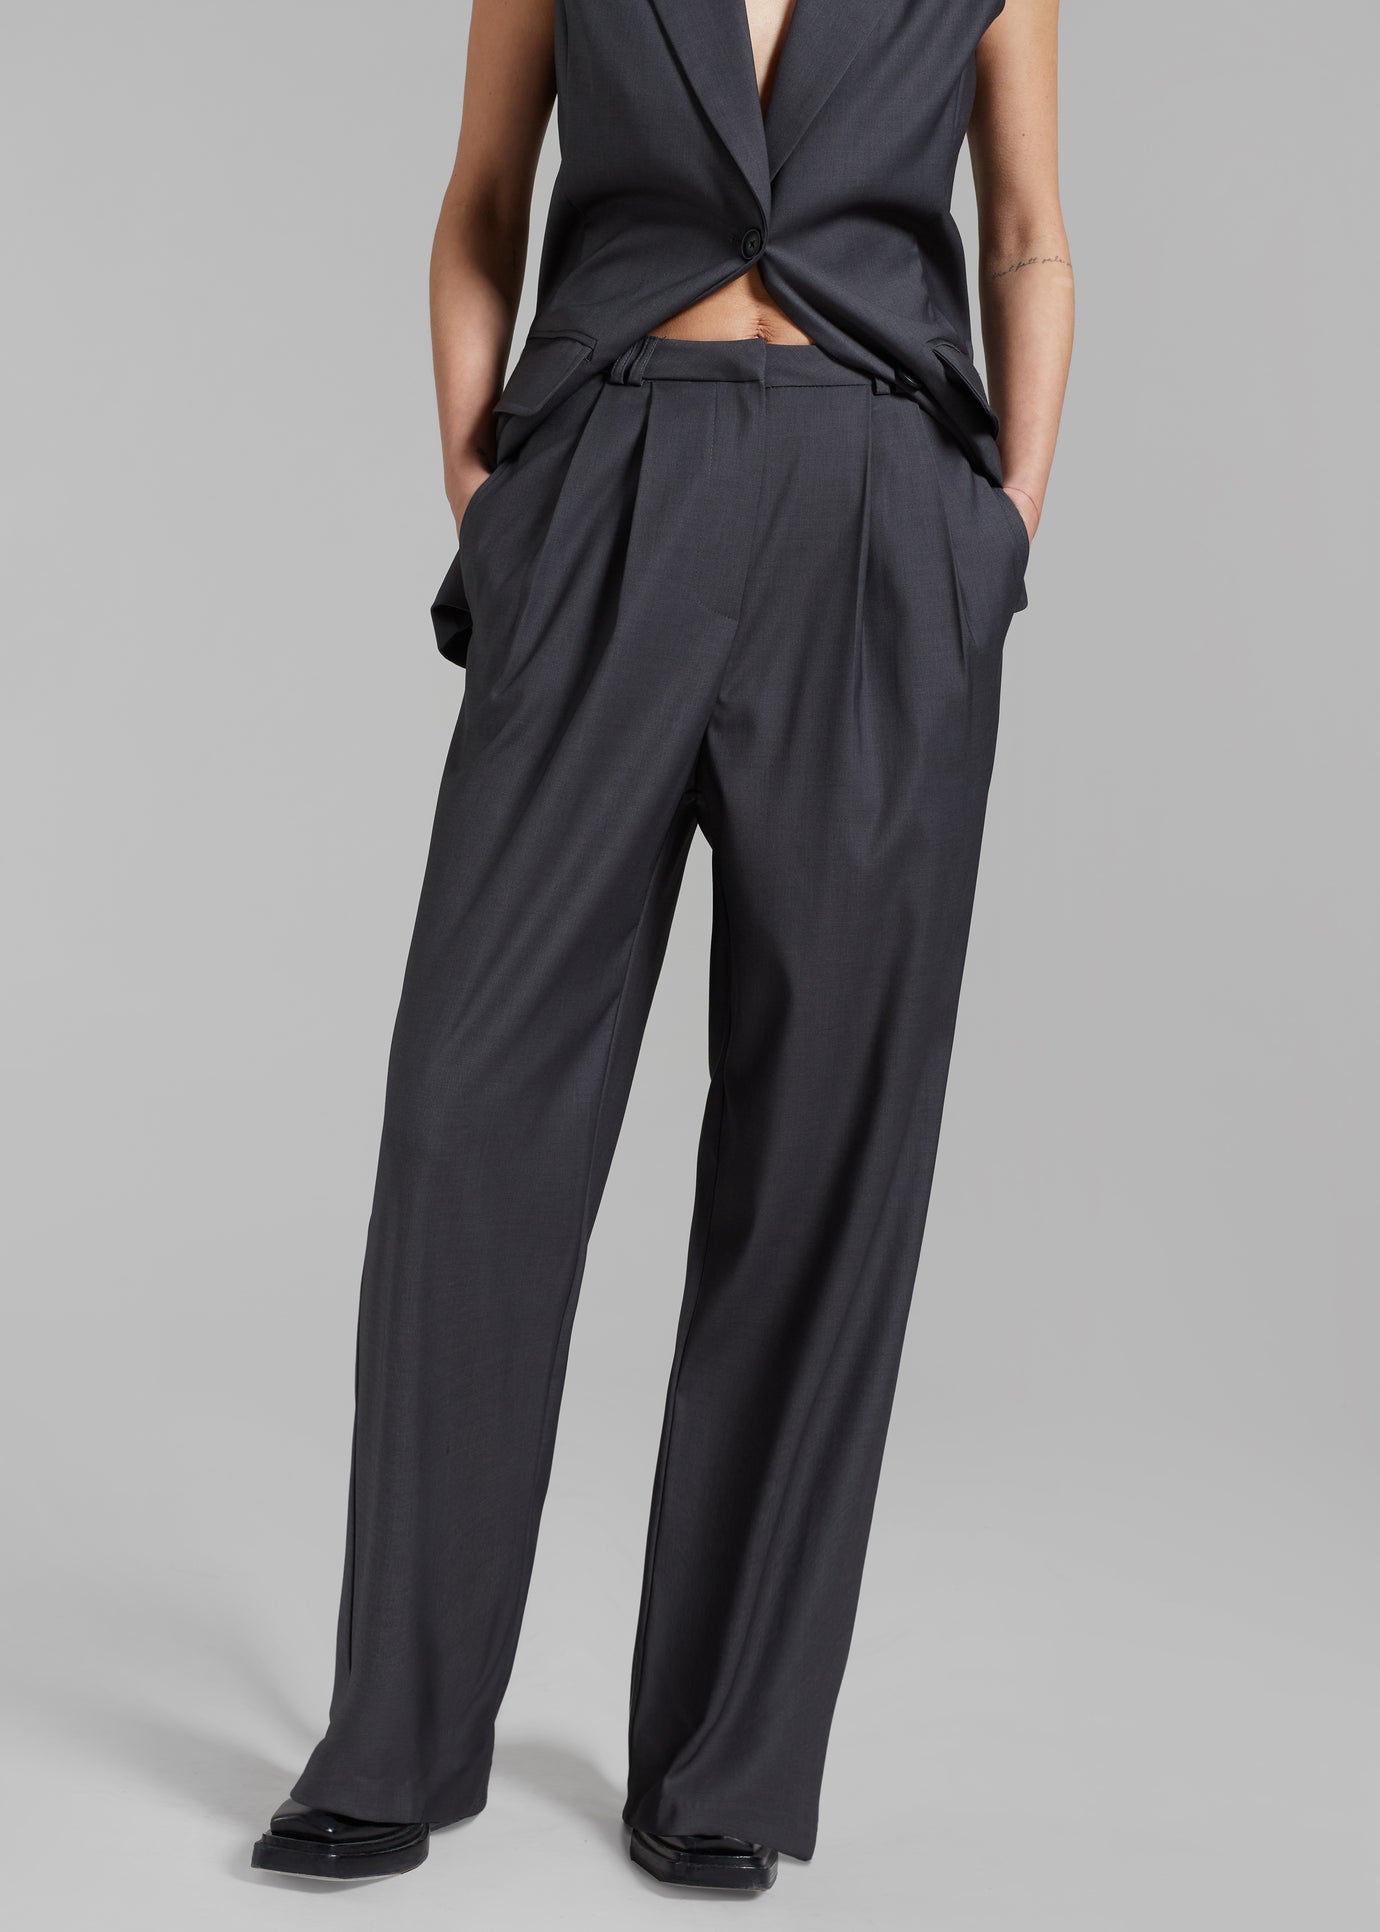 Durban Trousers - Charcoal - 1